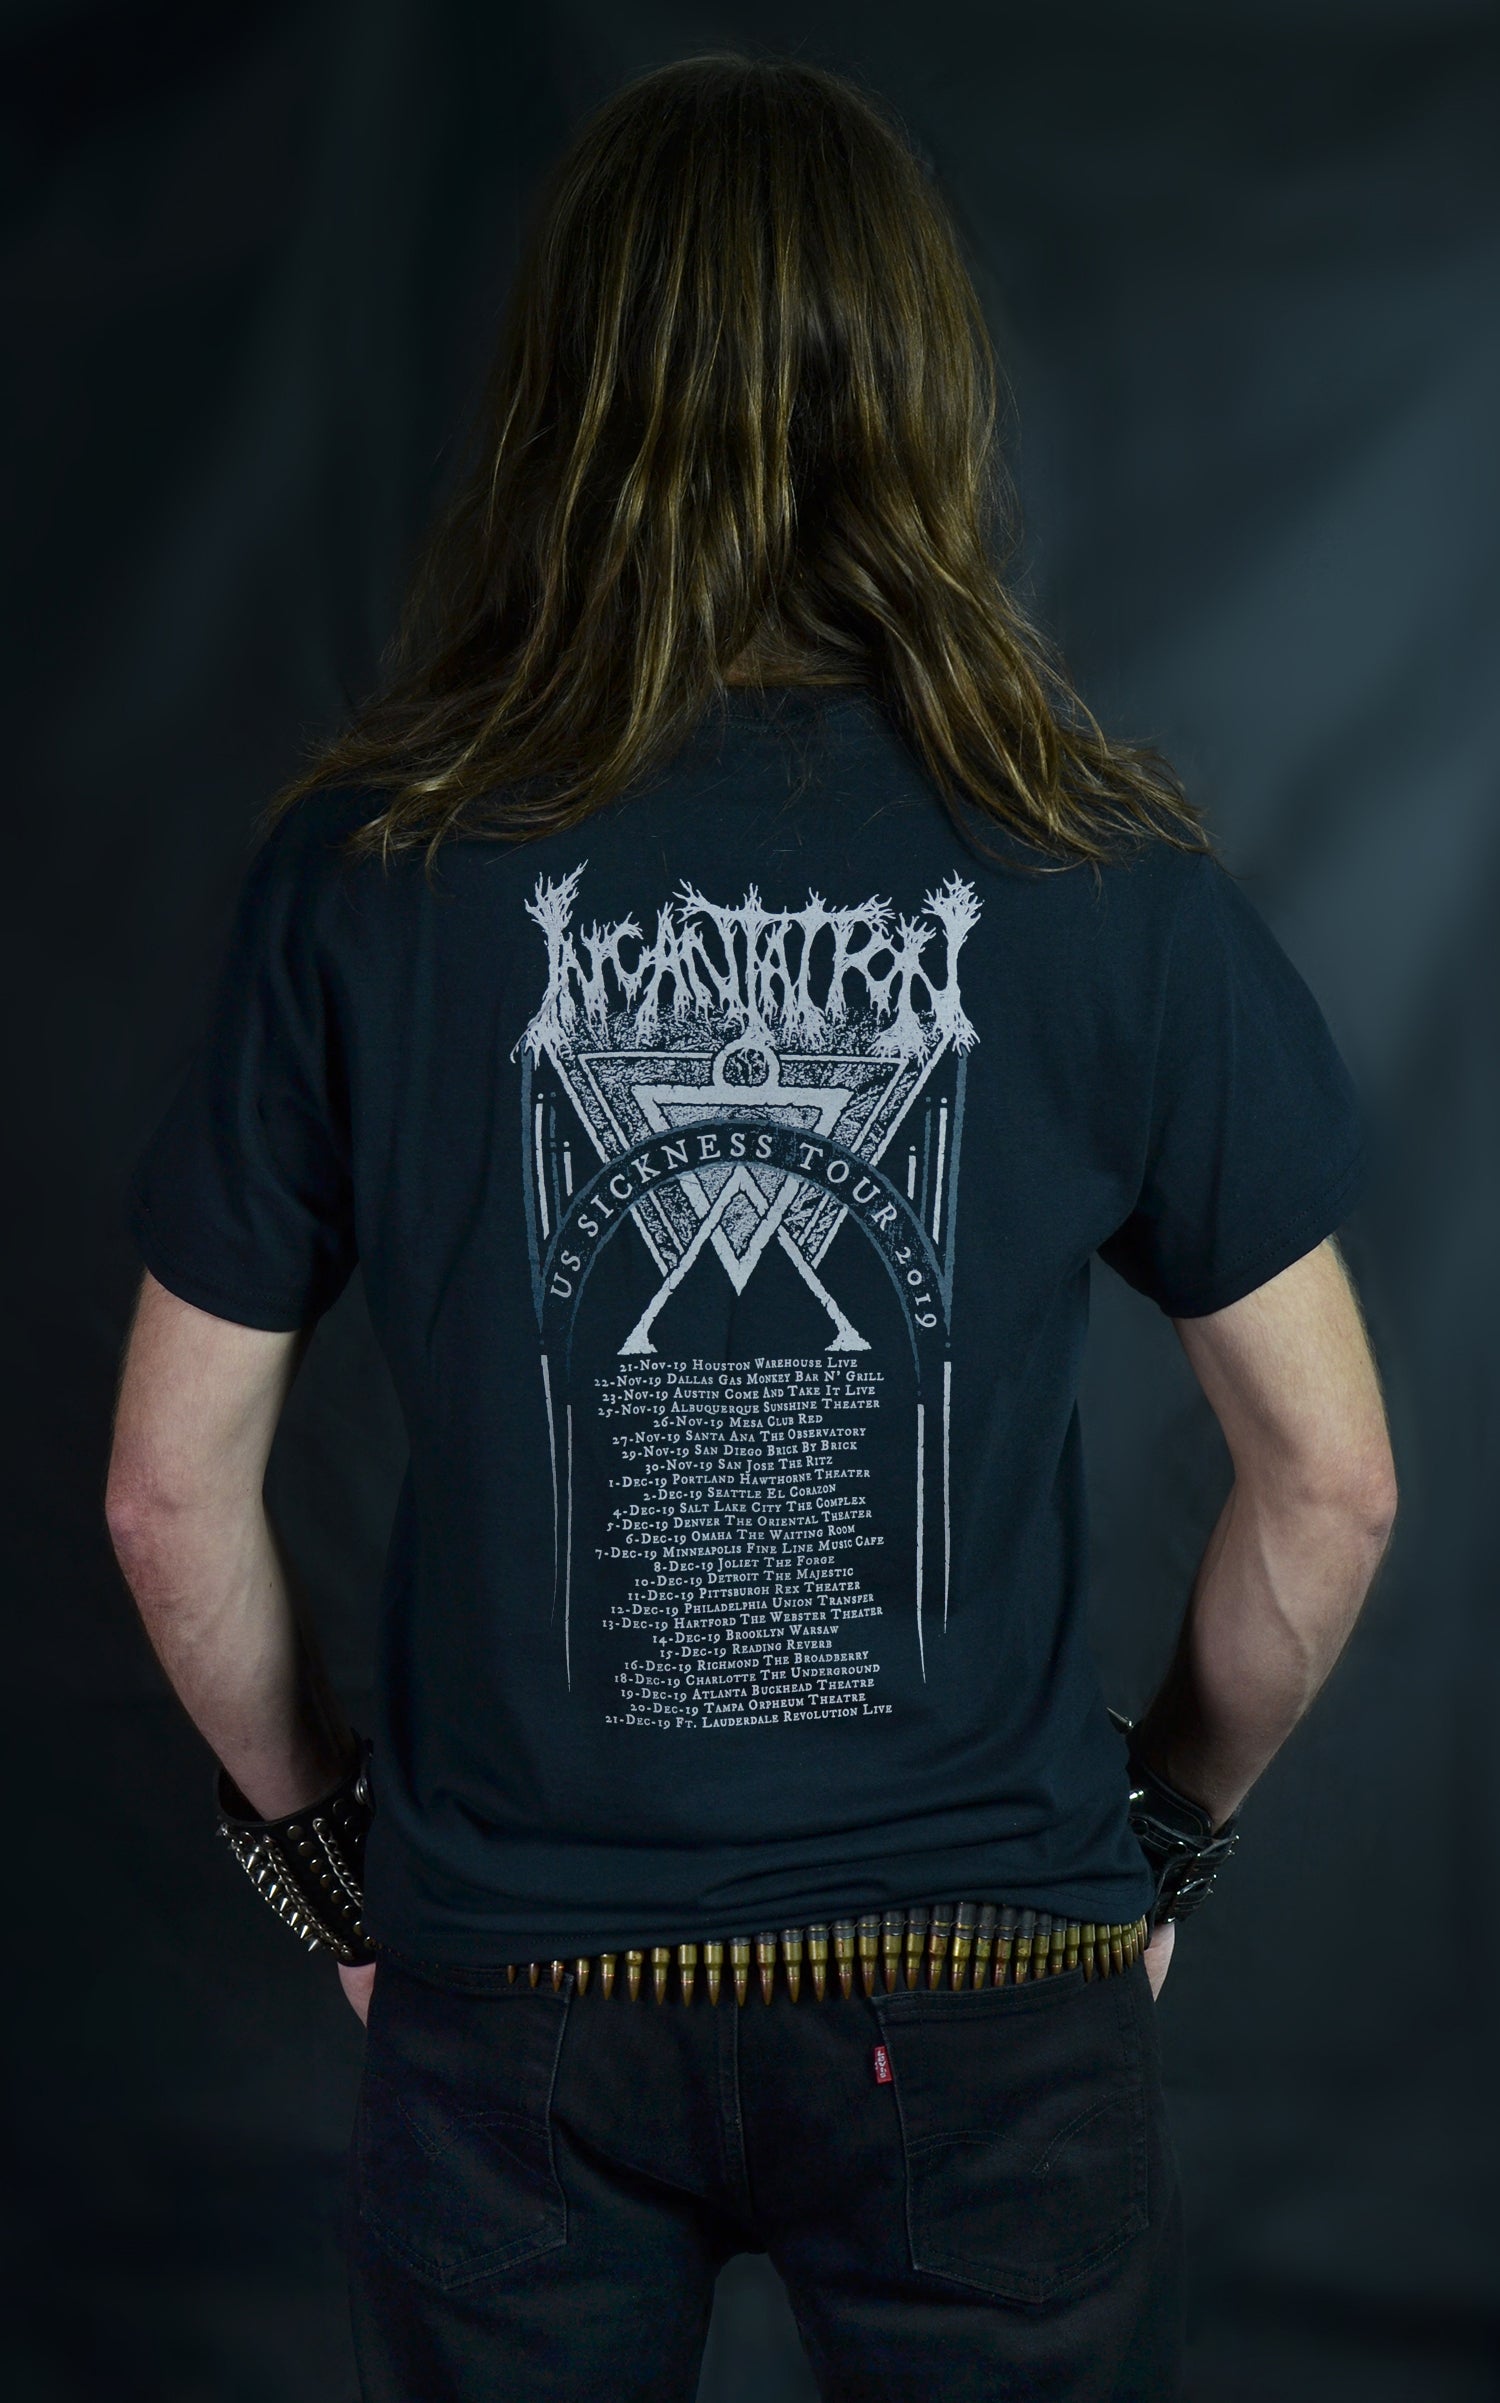 INCANTATION - Rotting With Your Christ (T-Shirt)